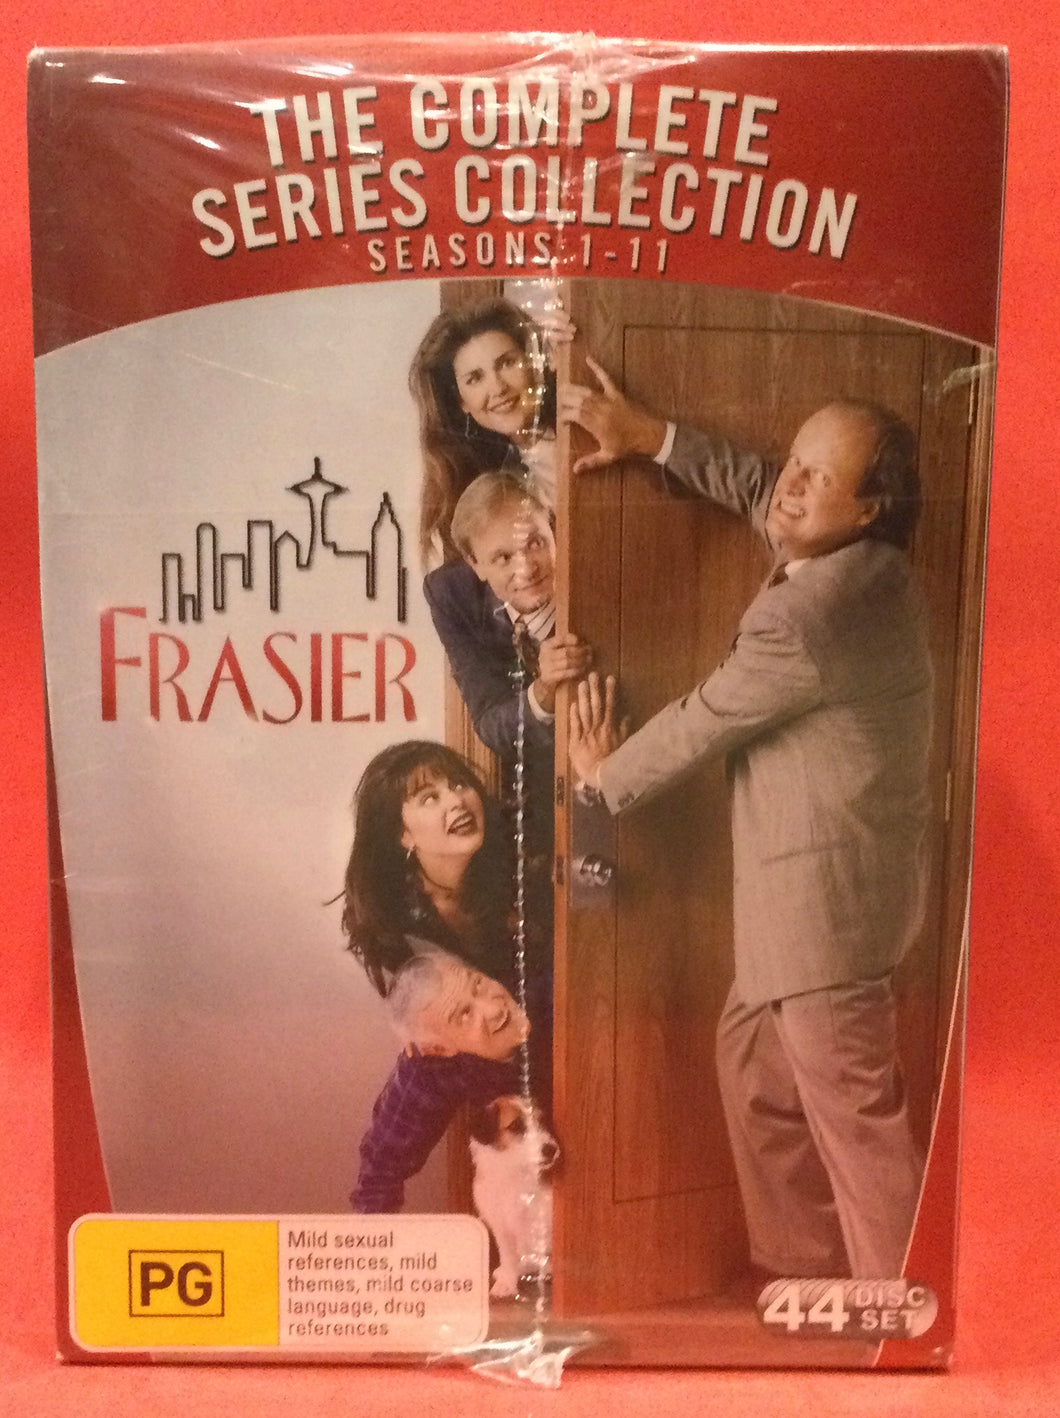 FRASIER - THE COMPLETE SERIES COLLECTION - SEASONS 1-11 - 44 DVD DISCS (SEALED)